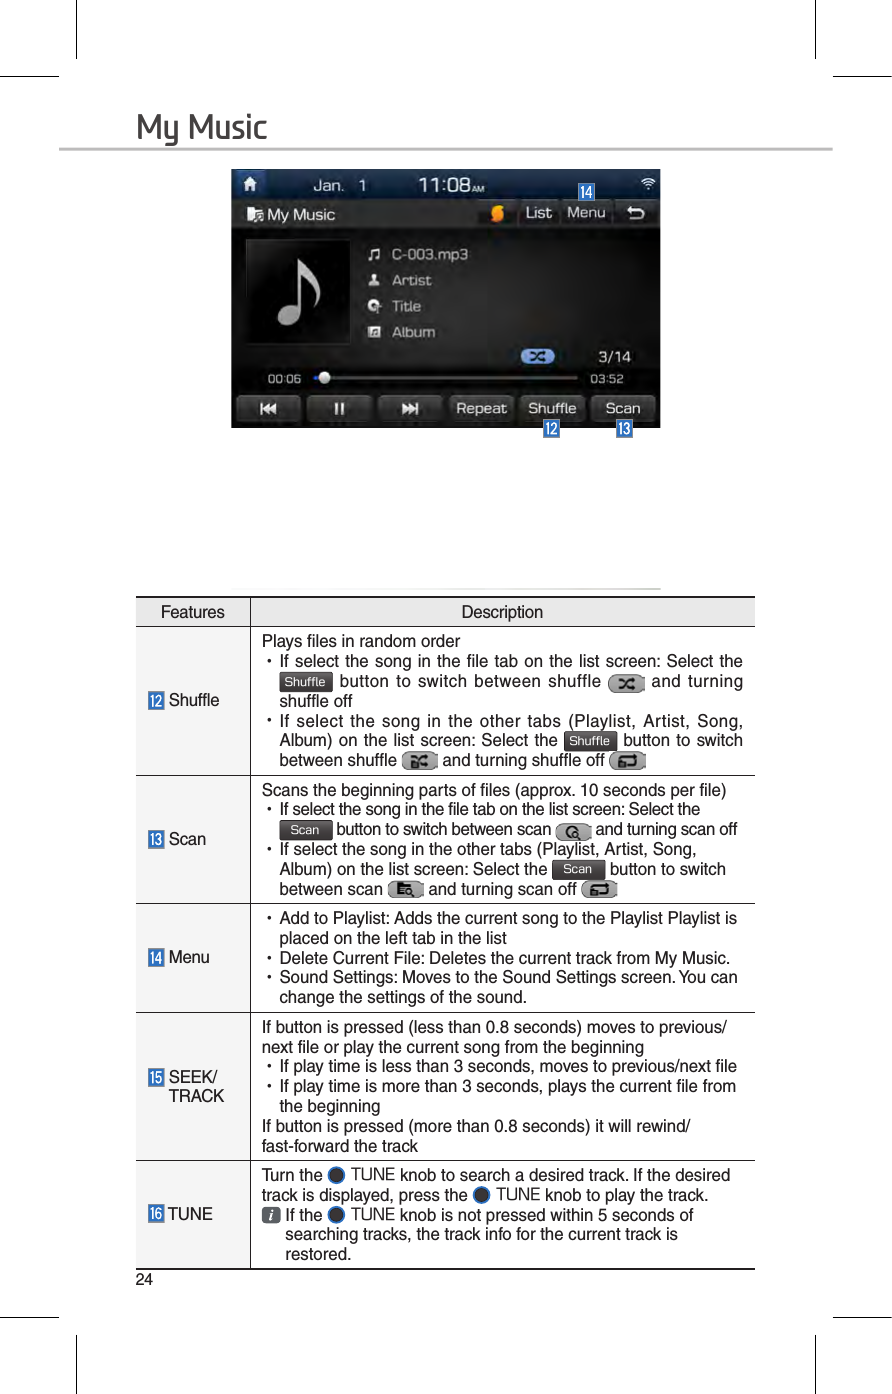 24Features Description ShufflePlays files in random order •If select the song in the file  tab on the list screen: Select the Shuffle  button  to  switch  between  shuffle    and  turning shuffle off  •If  select  the song  in  the  other  tabs (Playlist, Artist, Song, Album) on the list screen: Select the Shuffle button to switch between shuffle   and turning shuffle off  Scan Scans the beginning parts of files (approx. 10 seconds per file) •If select the song in the file tab on the list screen: Select the Scan button to switch between scan   and turning scan off  •If select the song in the other tabs (Playlist, Artist, Song, Album) on the list screen: Select the Scan button to switch between scan   and turning scan off  Menu  •Add to Playlist: Adds the current song to the Playlist Playlist is placed on the left tab in the list •Delete Current File: Deletes the current track from My Music. •Sound Settings: Moves to the Sound Settings screen. You can change the settings of the sound.  SEEK/     TRACKIf button is pressed (less than 0.8 seconds) moves to previous/next file or play the current song from the beginning  •If play time is less than 3 seconds, moves to previous/next file •If play time is more than 3 seconds, plays the current file from the beginning If button is pressed (more than 0.8 seconds) it will rewind/fast-forward the track TUNETurn the   TUNE knob to search a desired track. If the desired track is displayed, press the   TUNE knob to play the track. If the   TUNE knob is not pressed within 5 seconds of searching tracks, the track info for the current track is restored.My Music